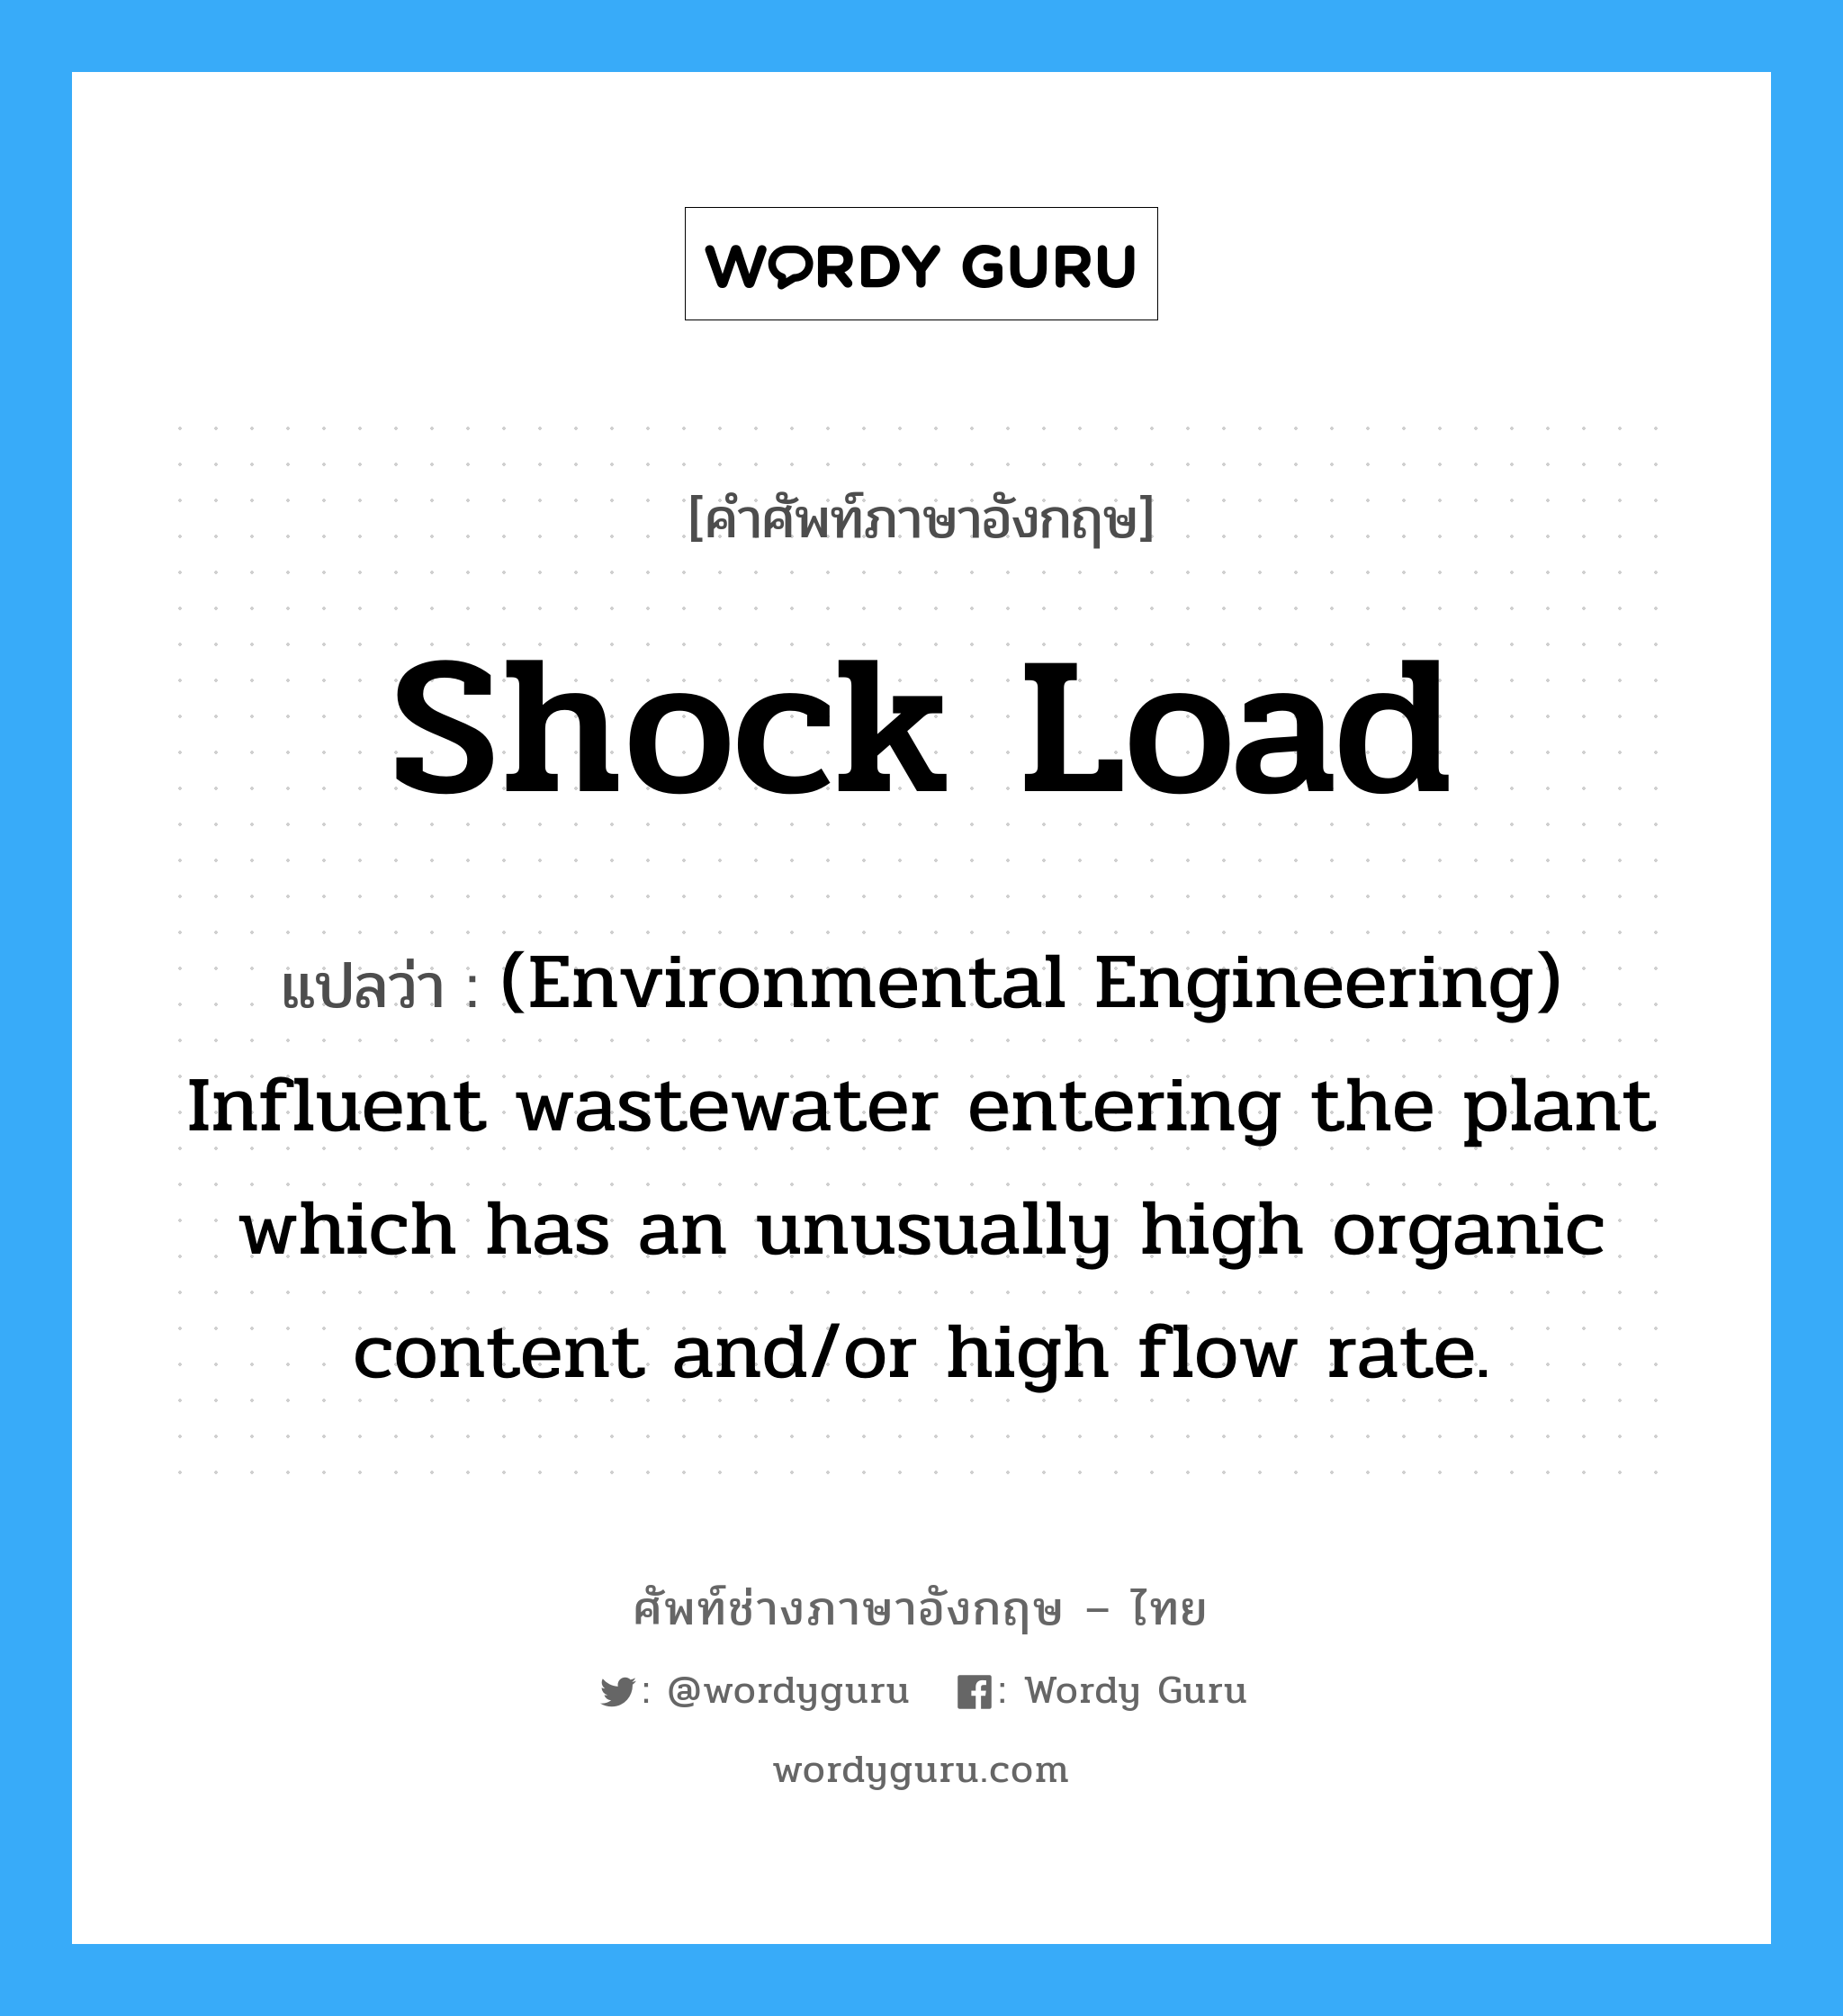 Shock load แปลว่า?, คำศัพท์ช่างภาษาอังกฤษ - ไทย Shock load คำศัพท์ภาษาอังกฤษ Shock load แปลว่า (Environmental Engineering) Influent wastewater entering the plant which has an unusually high organic content and/or high flow rate.